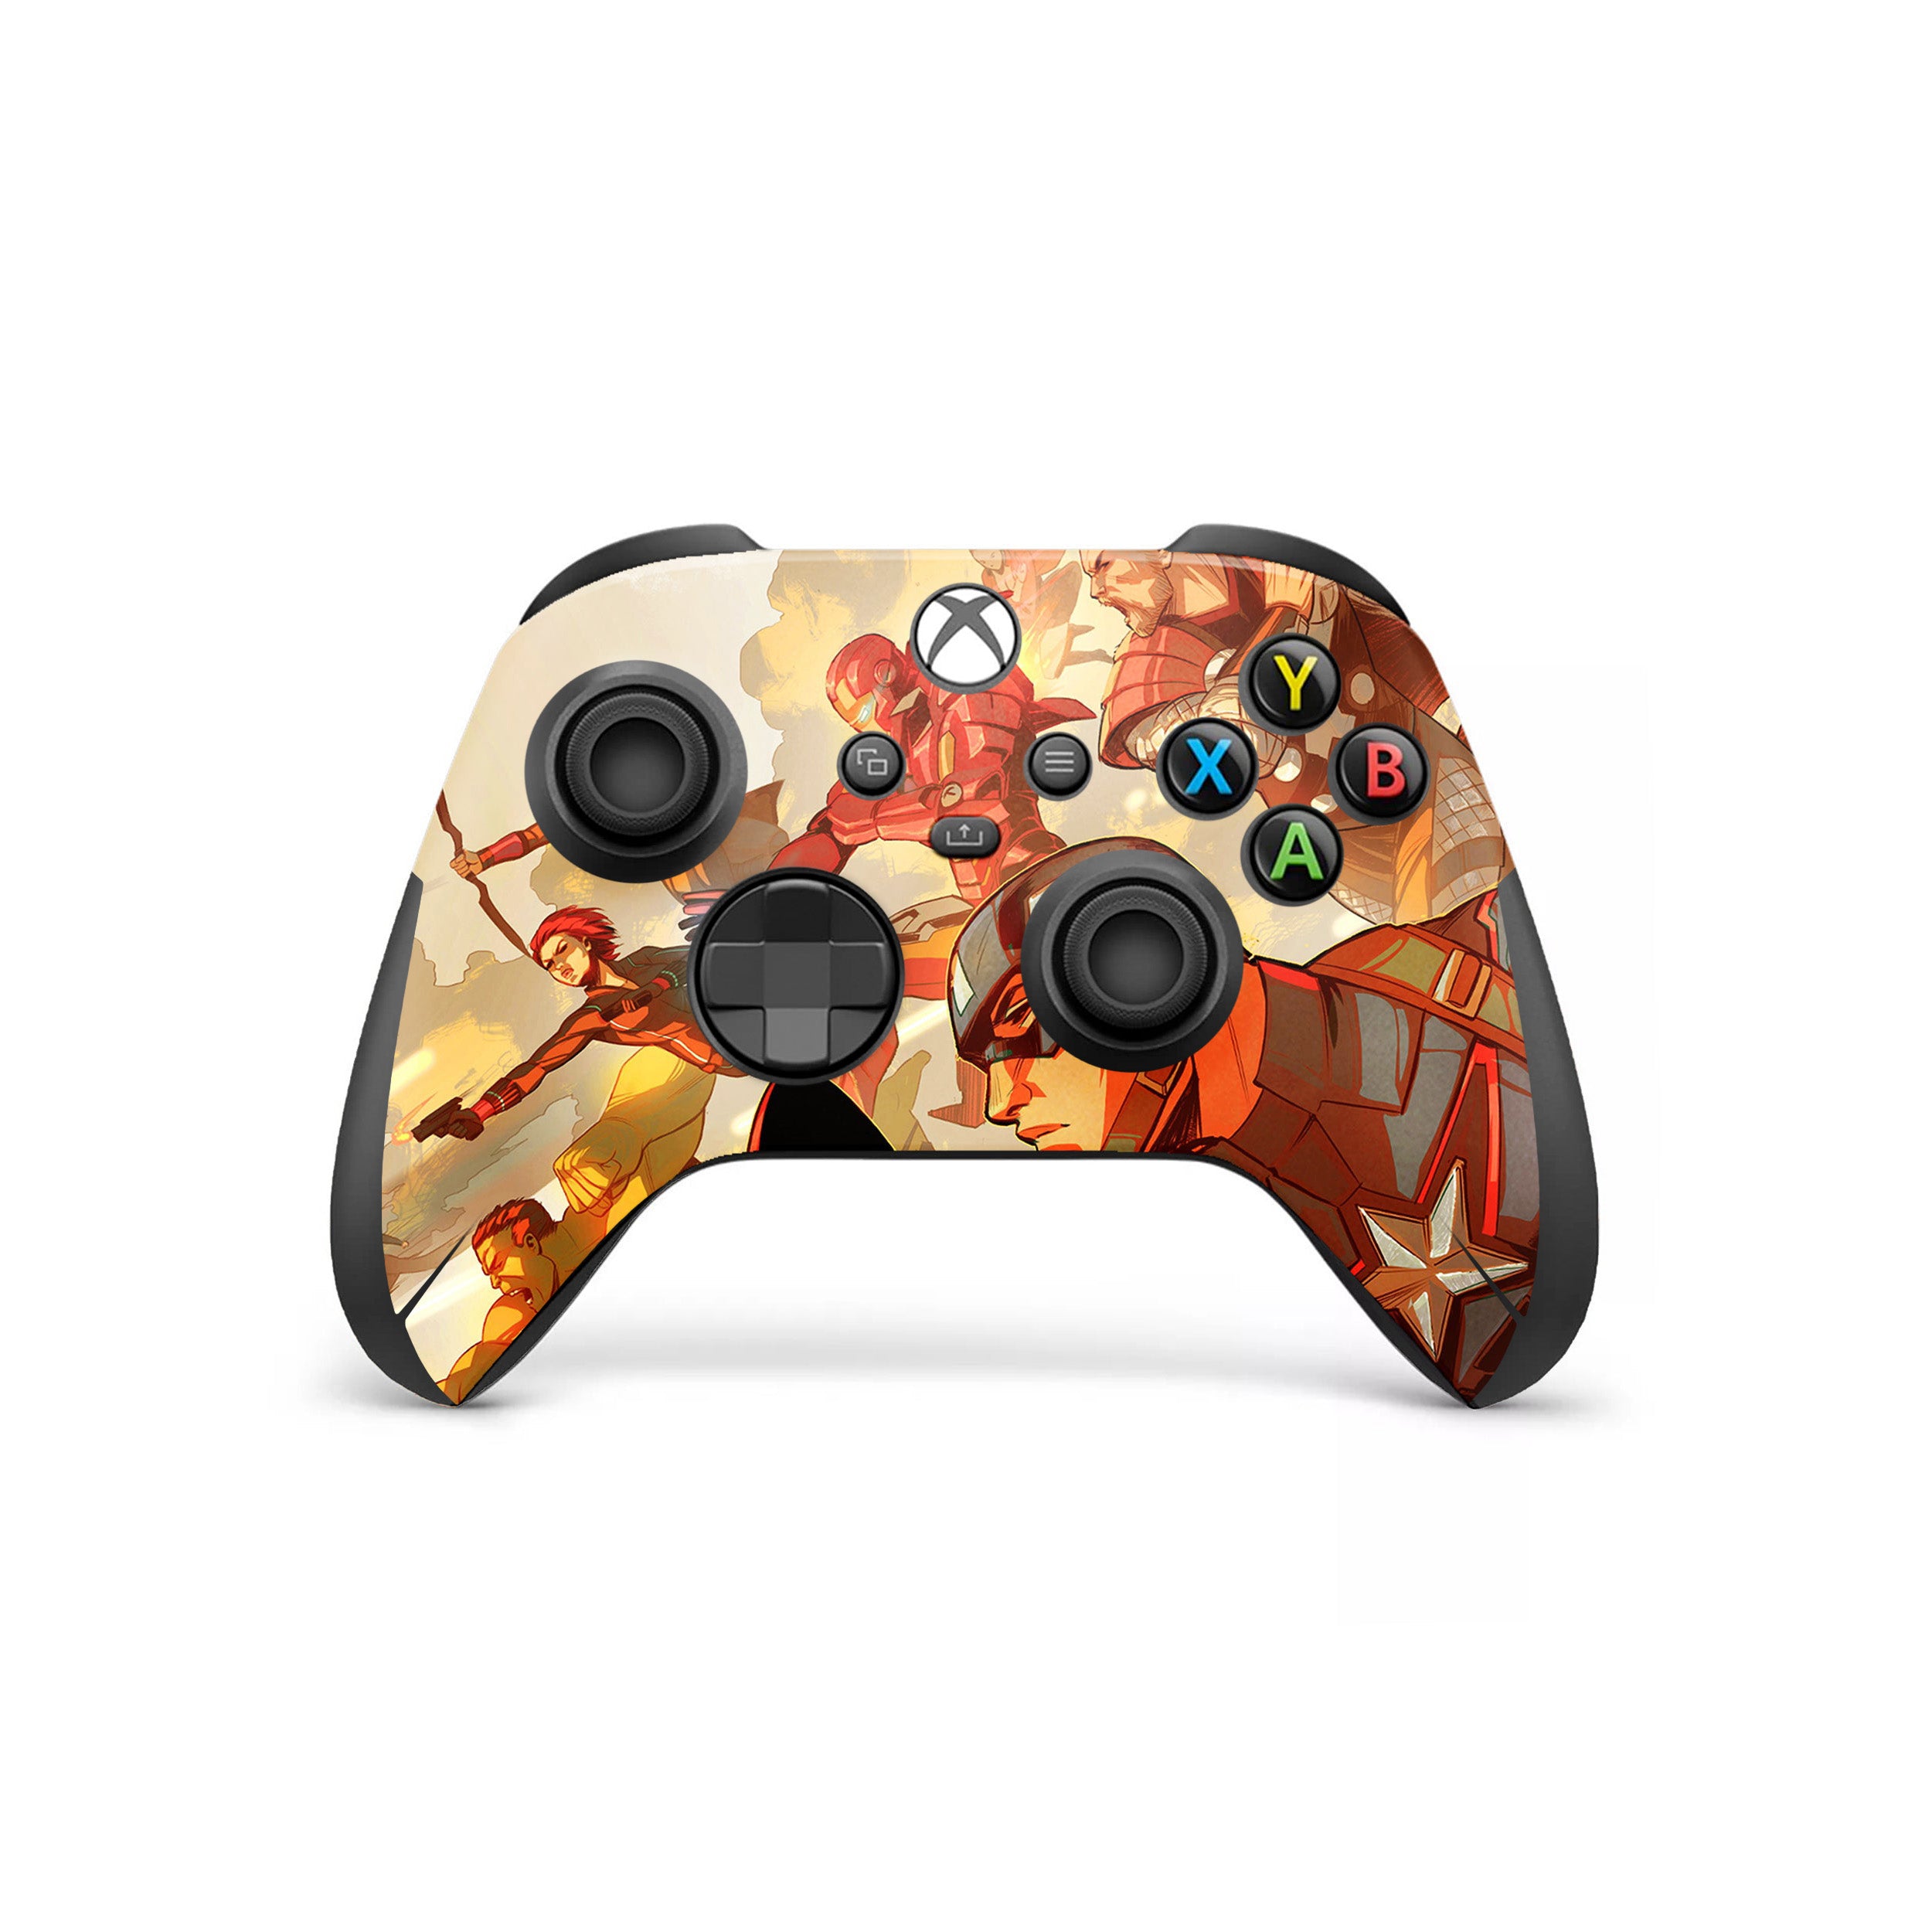 A video game skin featuring a Marvel Comics Avengers design for the Xbox Wireless Controller.